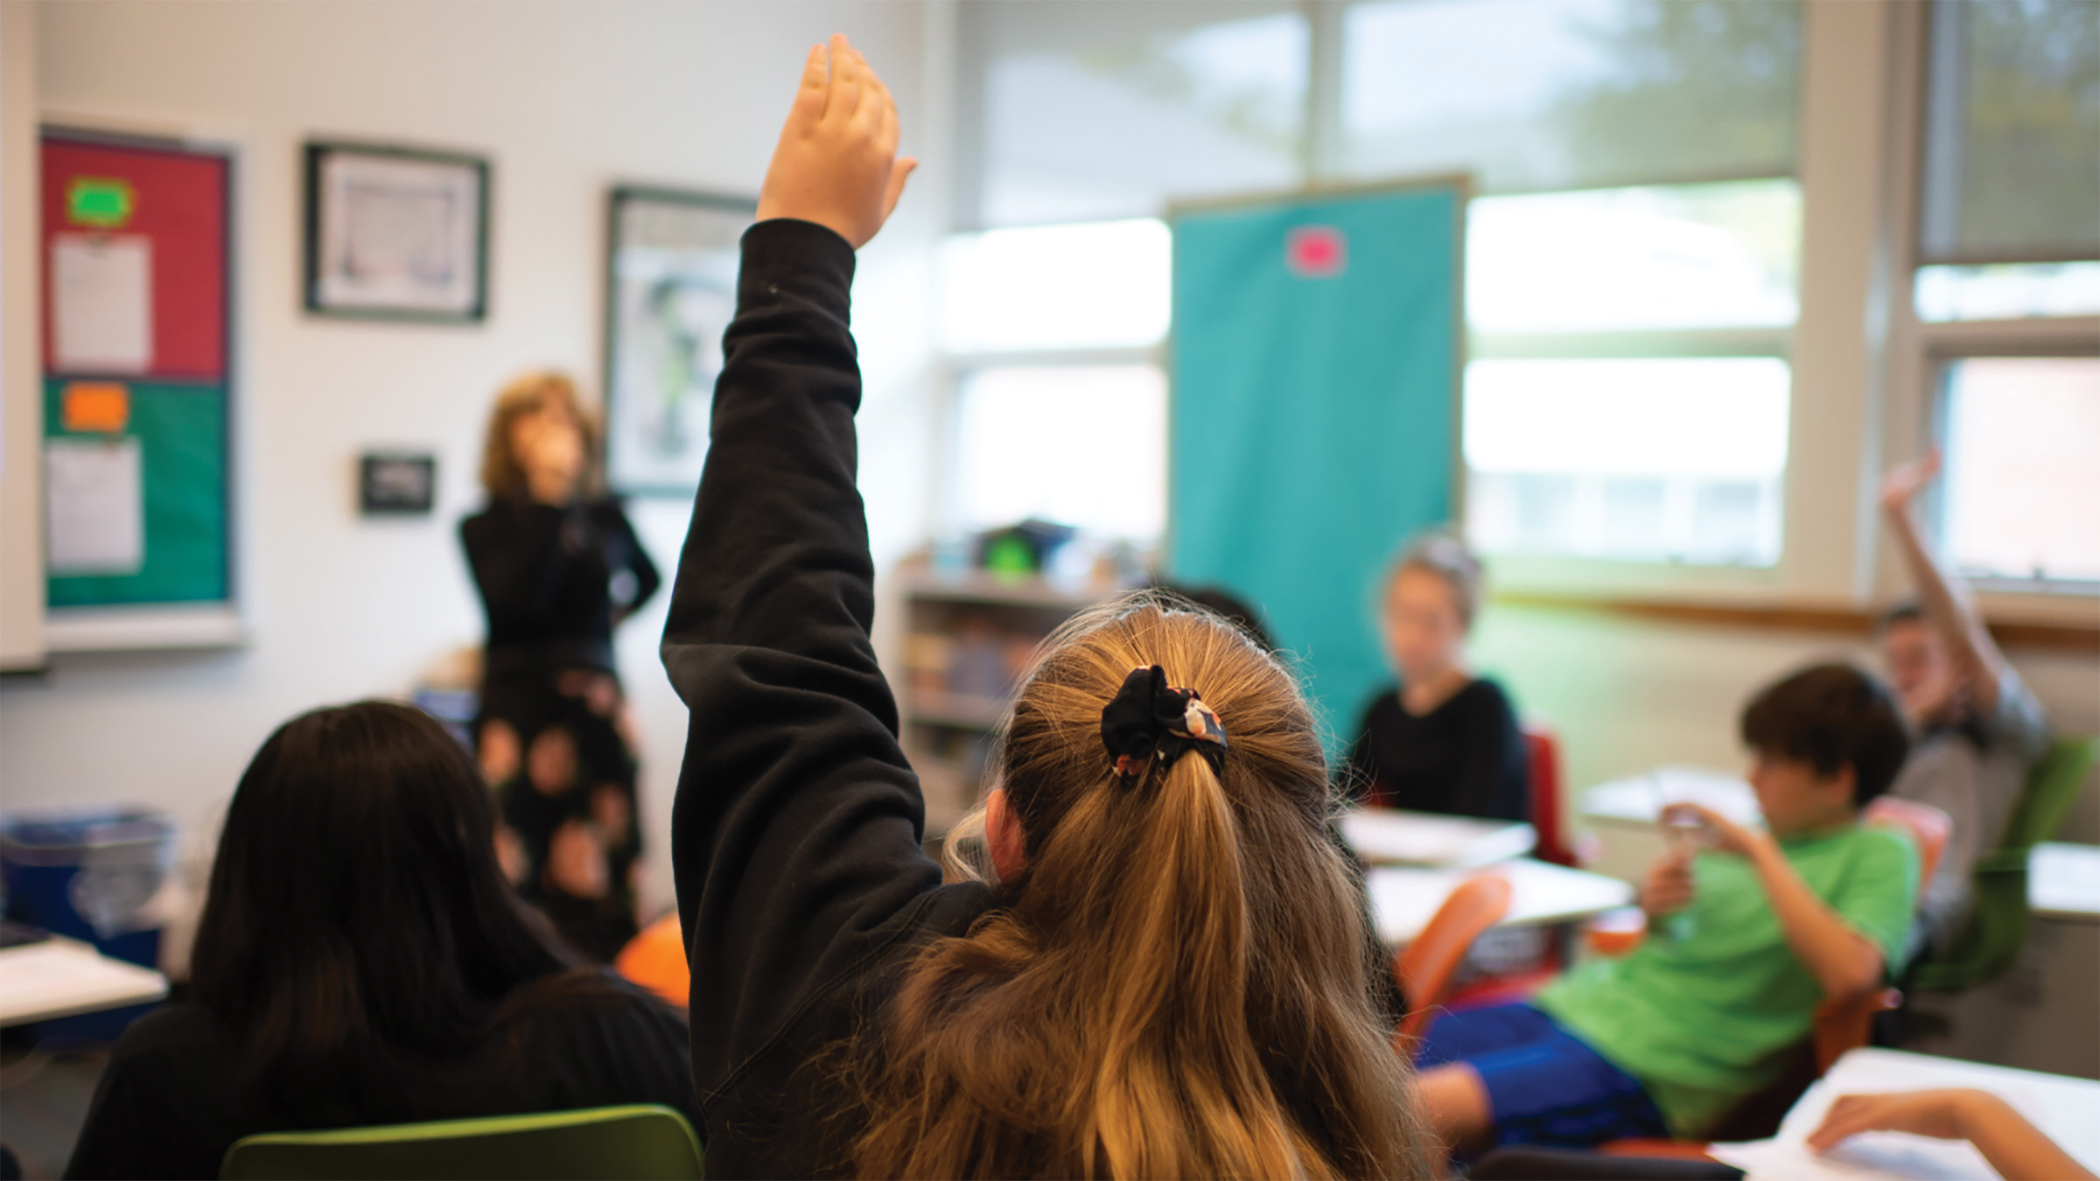 Closeup of student raising hand in classroom. Other students and teacher at front of classroom.